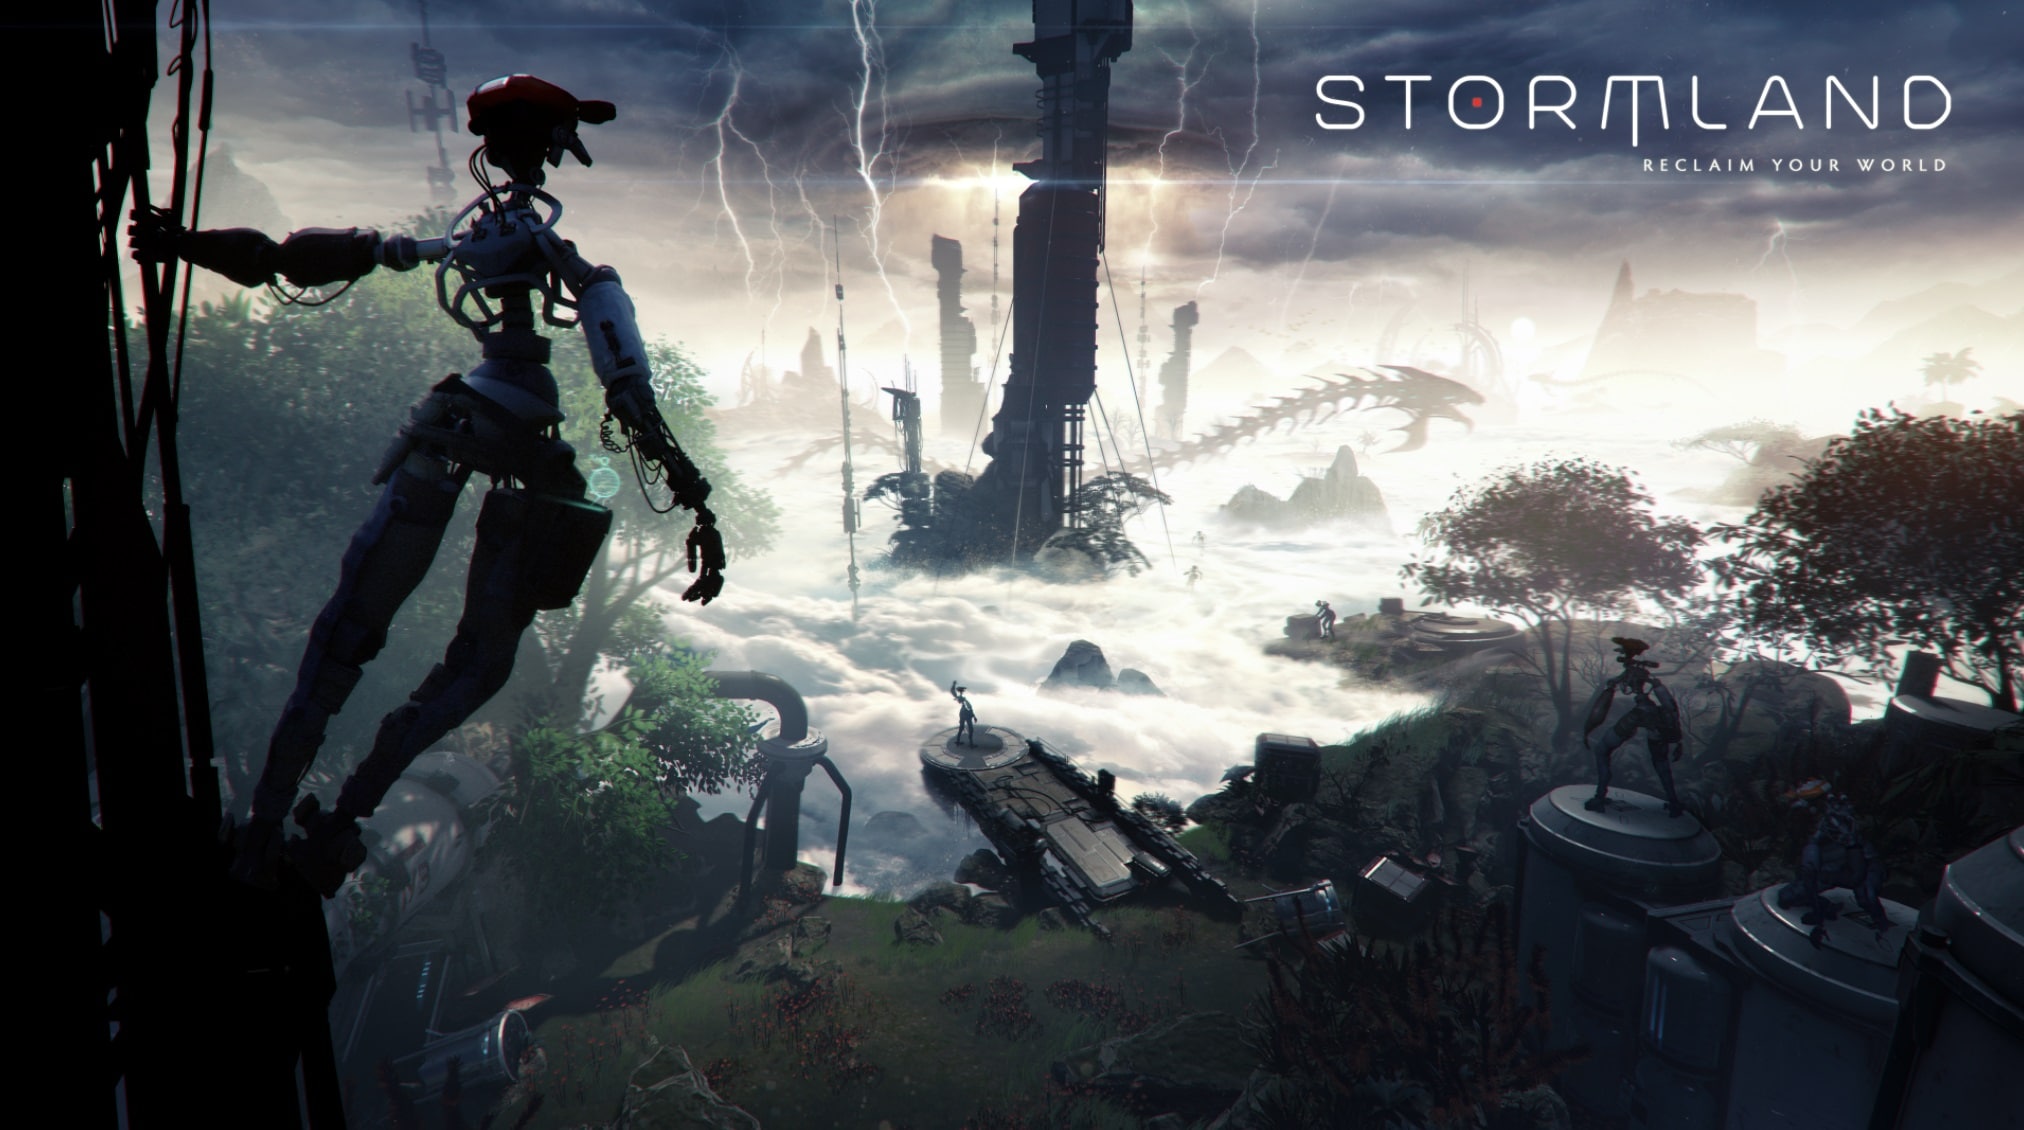 Stormland is a 2019 action-adventure game developed by Insomniac Games and published by Oculus Studios for the Oculus Rift virtual reality headset.